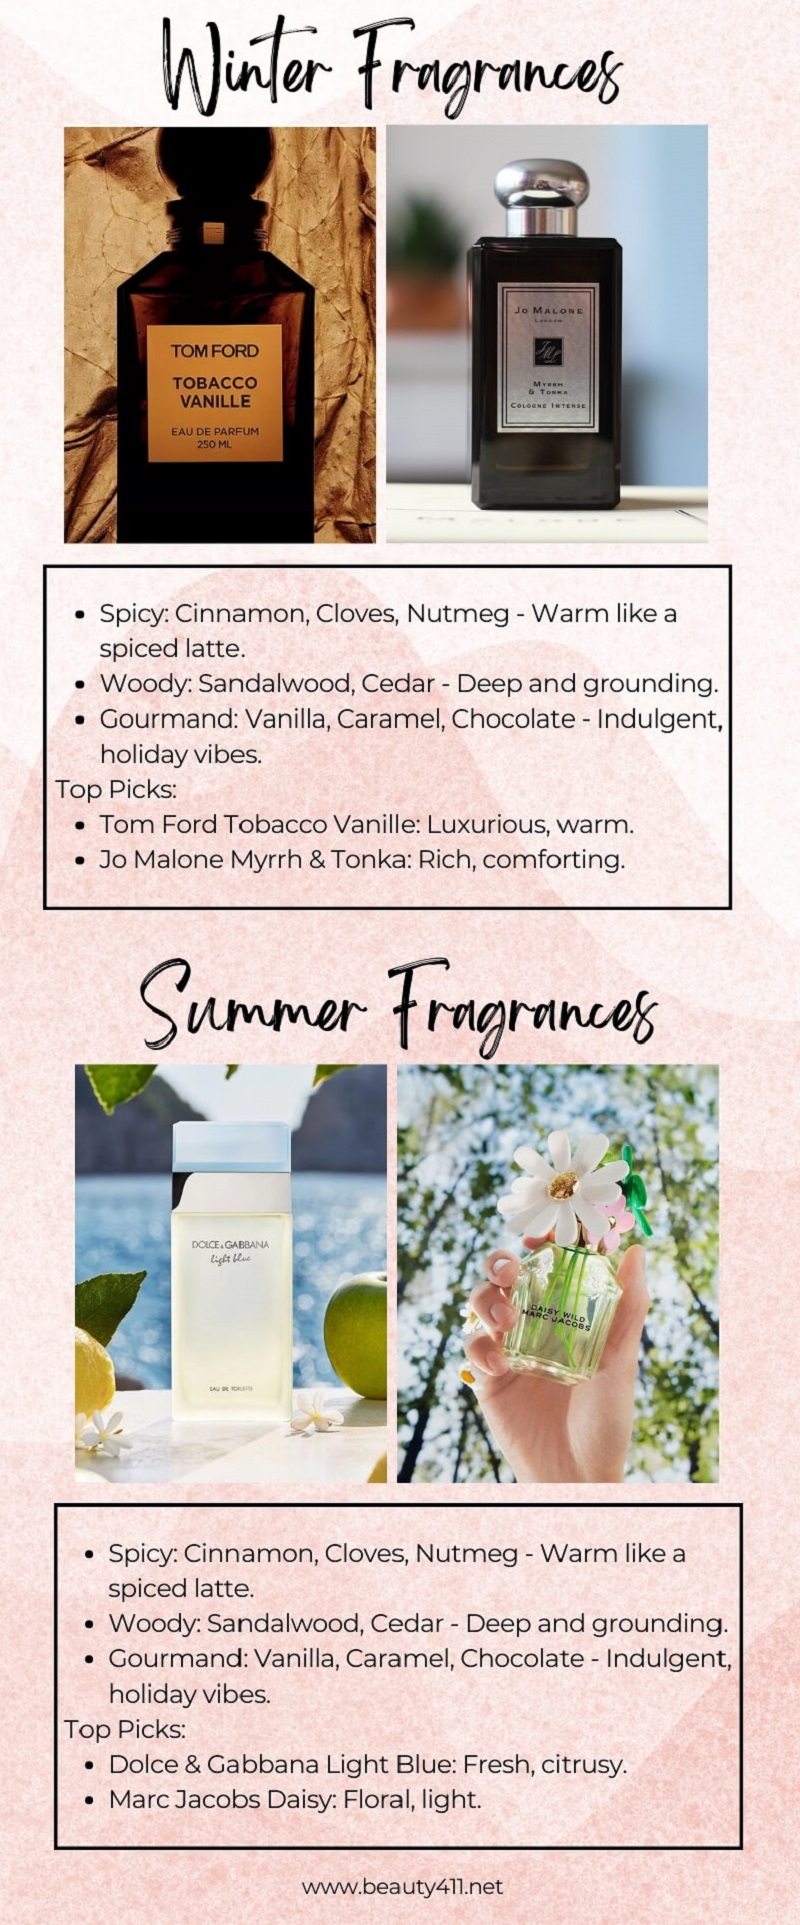 Infographic about Summer and Winter Fragrances